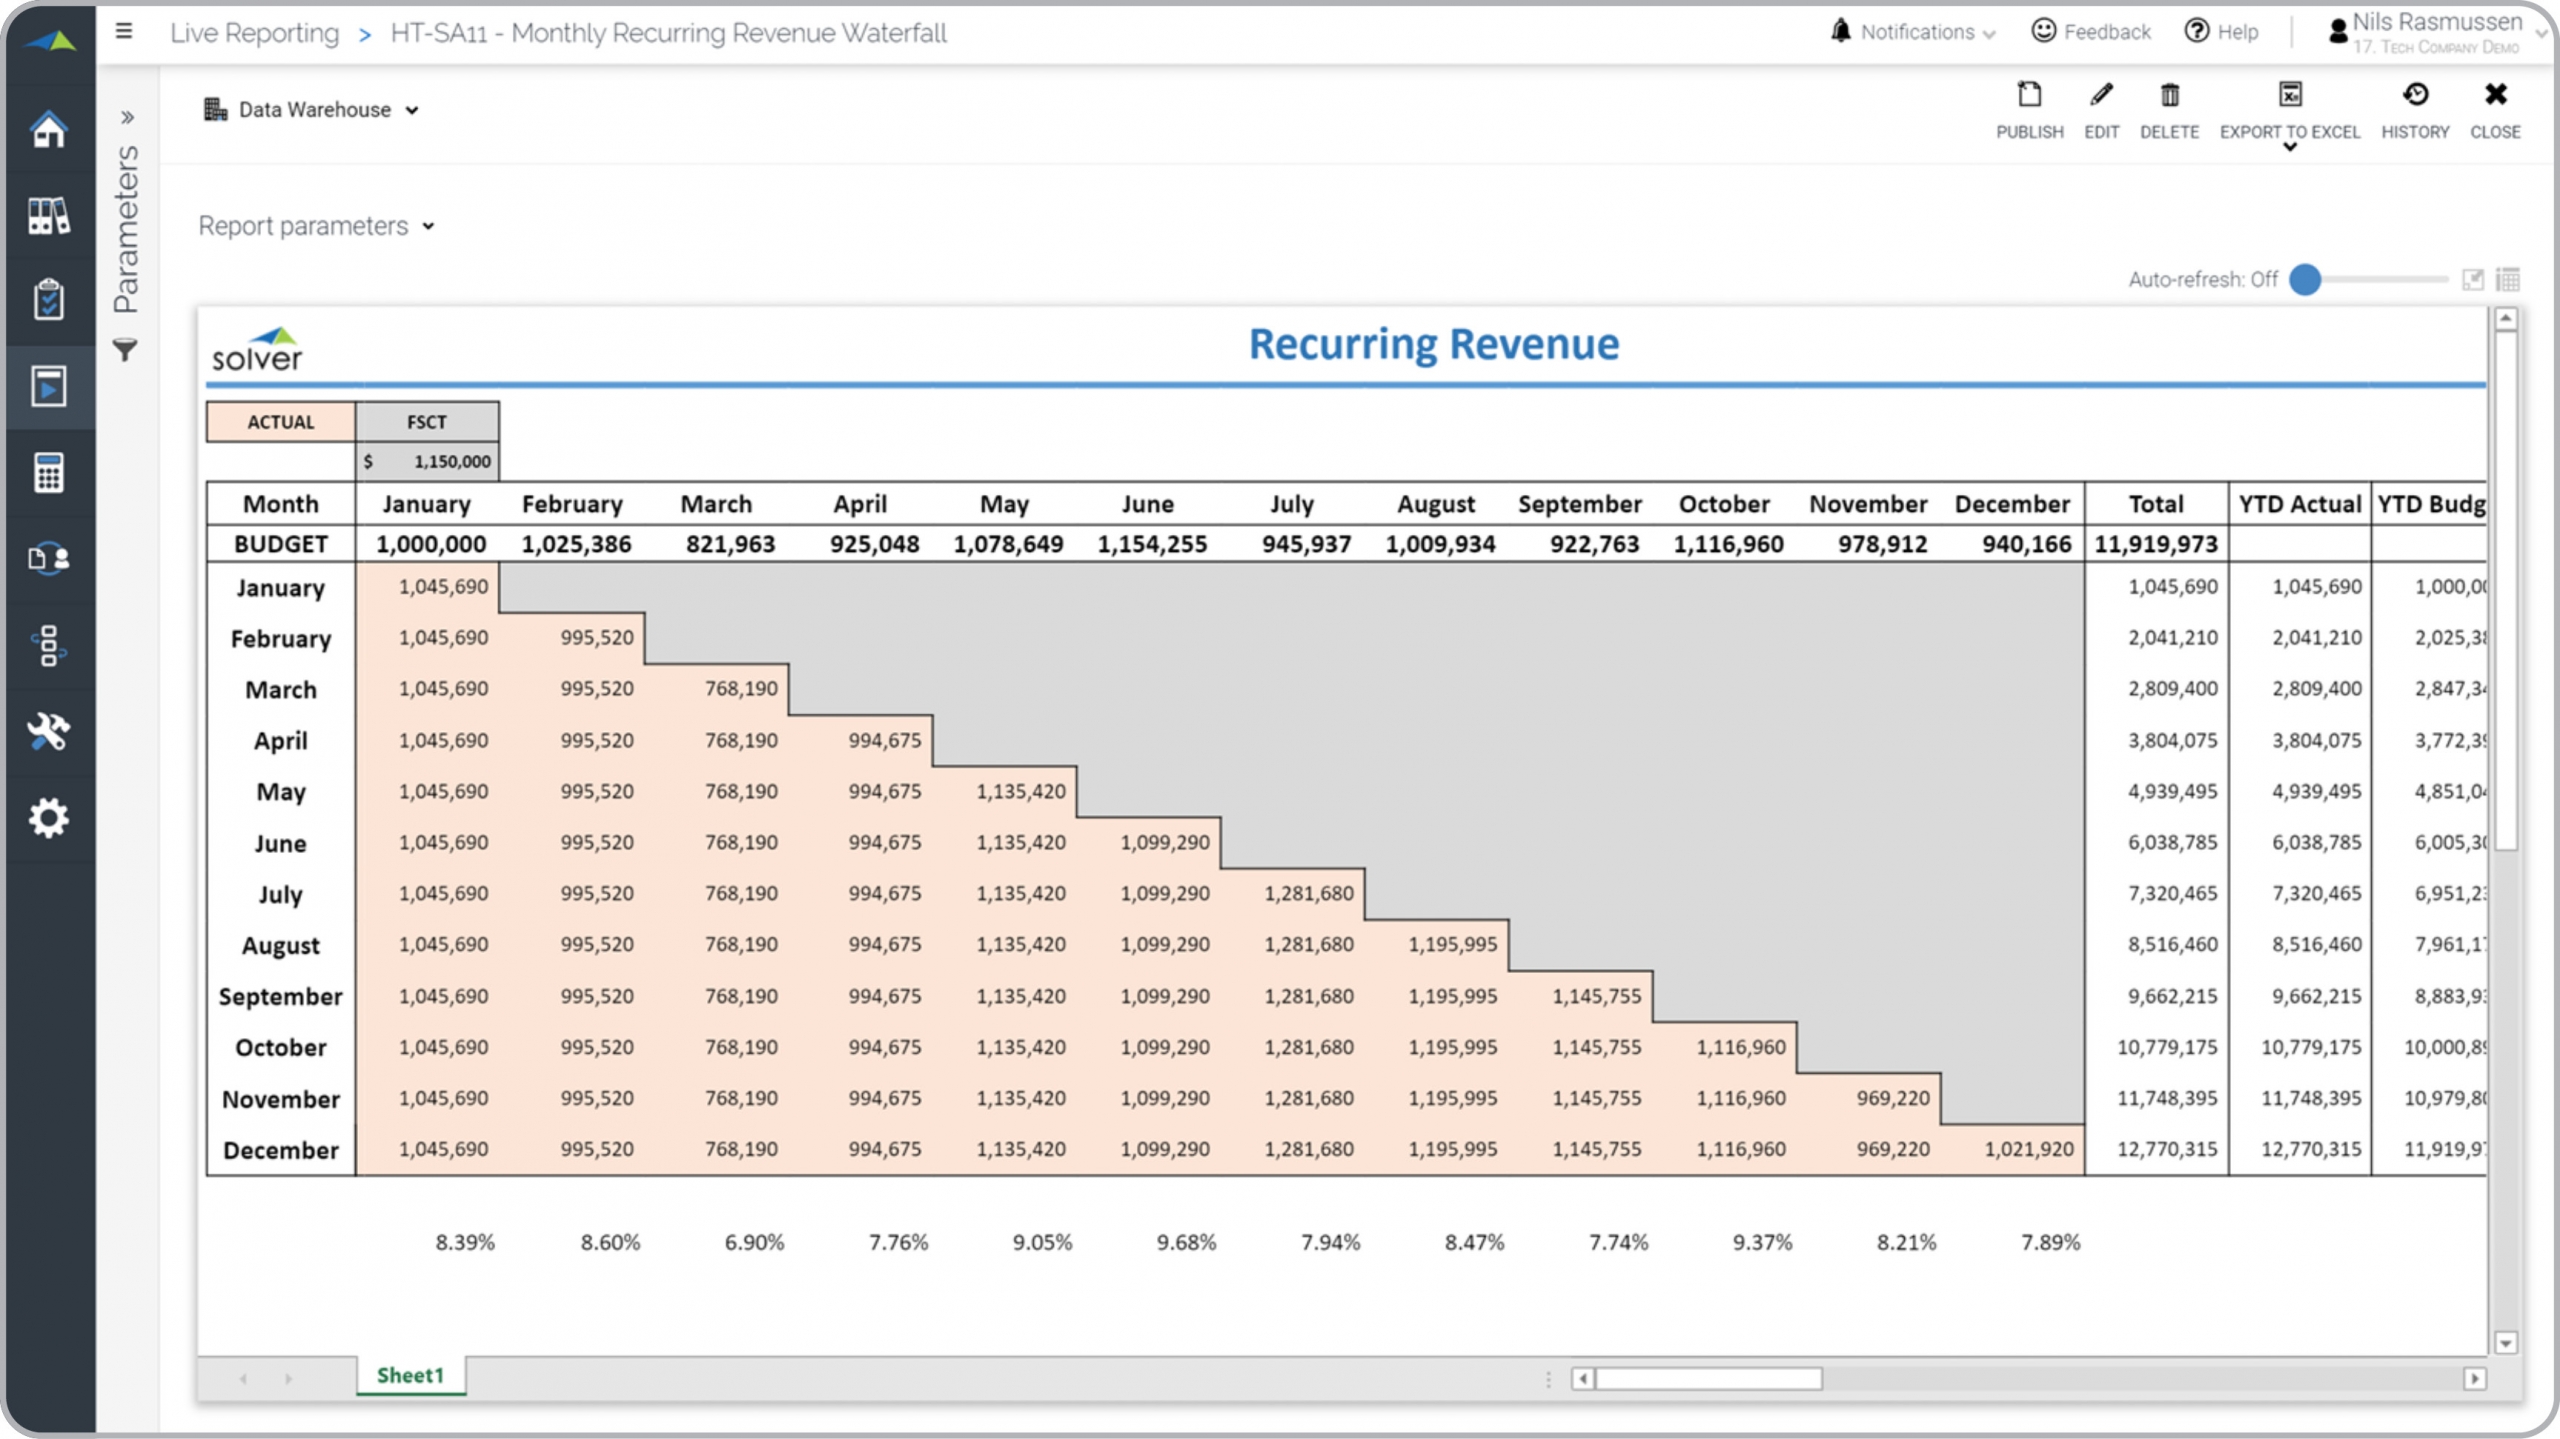 Example of Waterfall Recurring Revenue Report for a Technology Company 